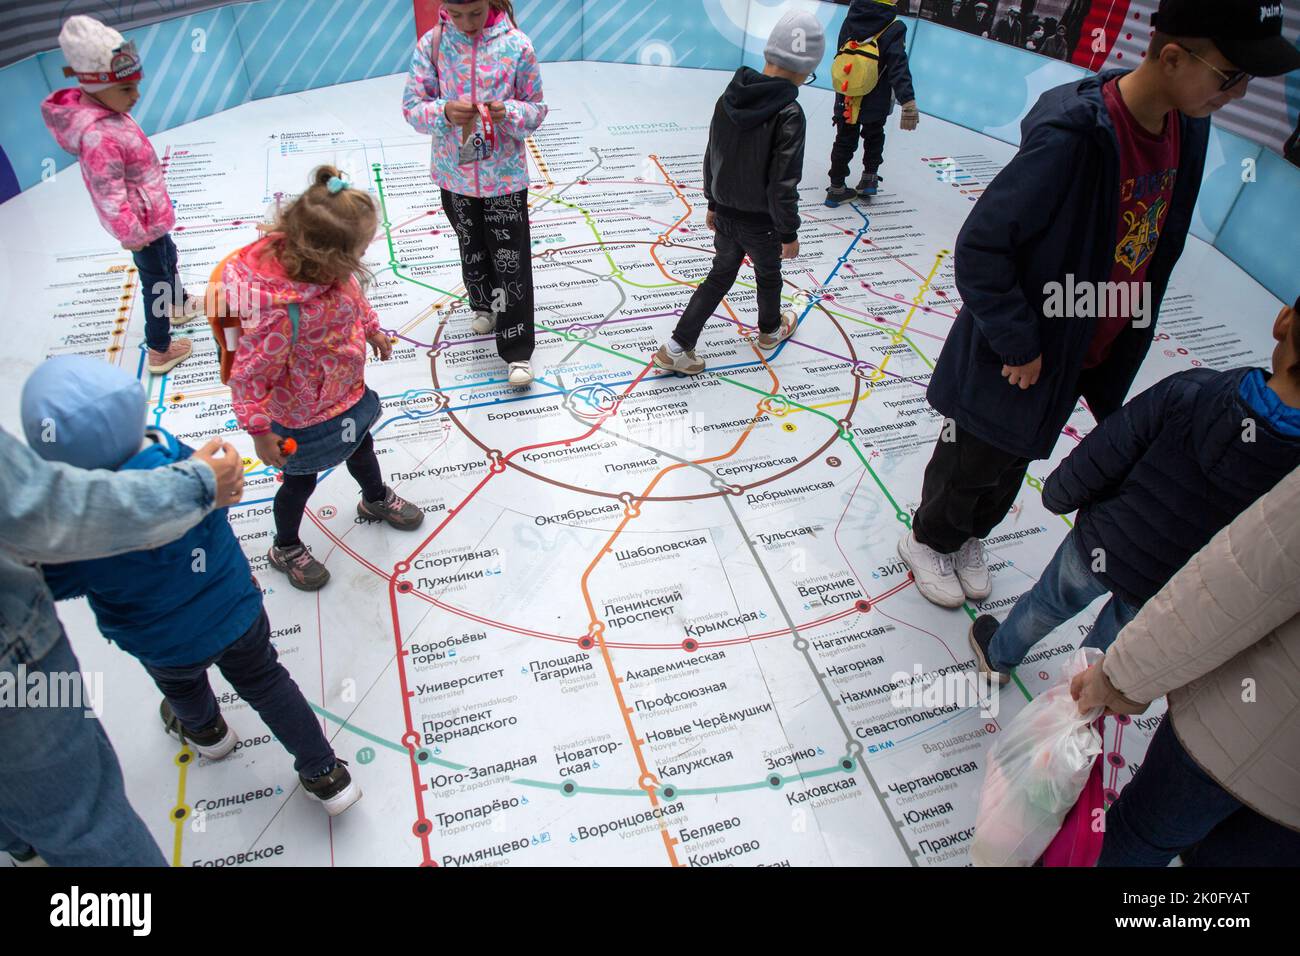 Moscow, Russia. 11th of September, 2022. children are considering the scheme of the Moscow metro system during celebrations marking the 875th birthday of Moscow city in Tverskaya Street, Russia. Nikolay Vinokurov/Alamy Live News Stock Photo